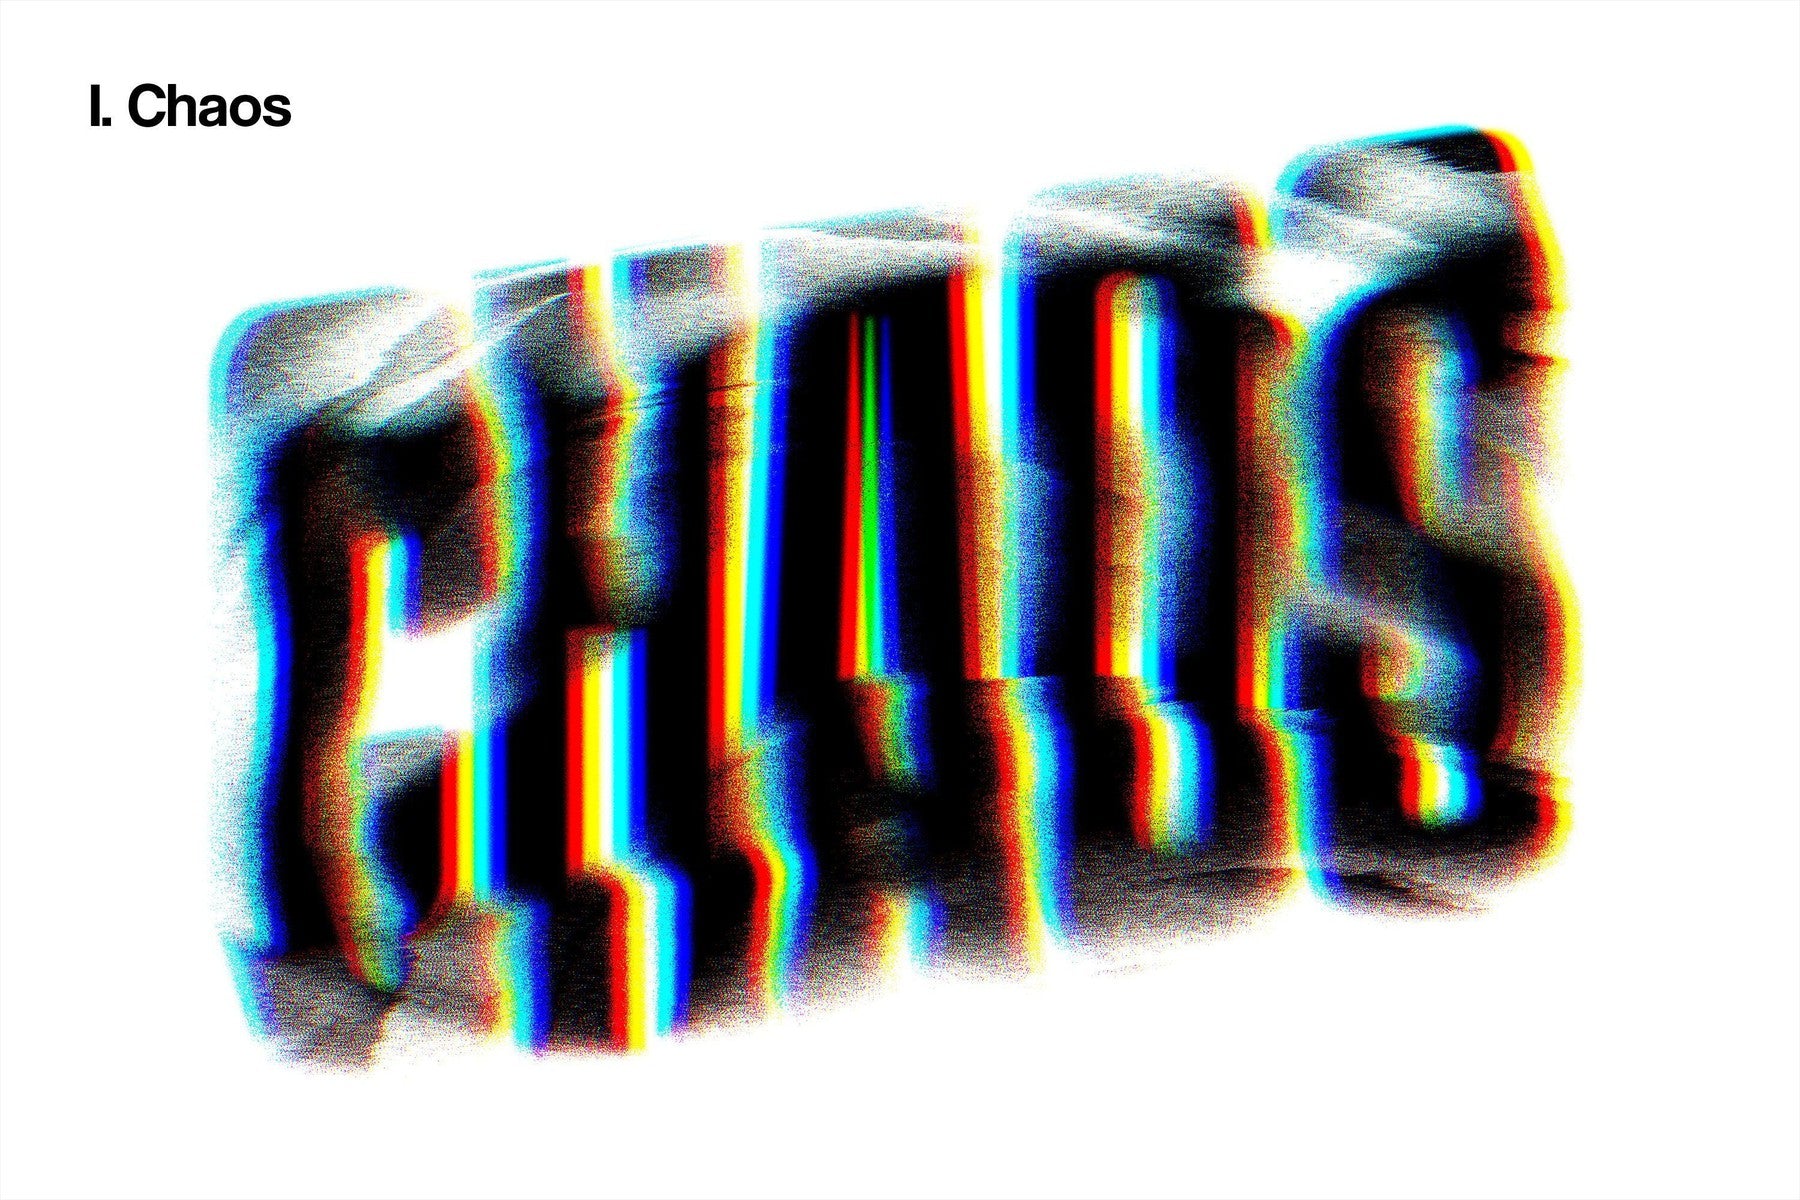 Glitch Text Effects Collection